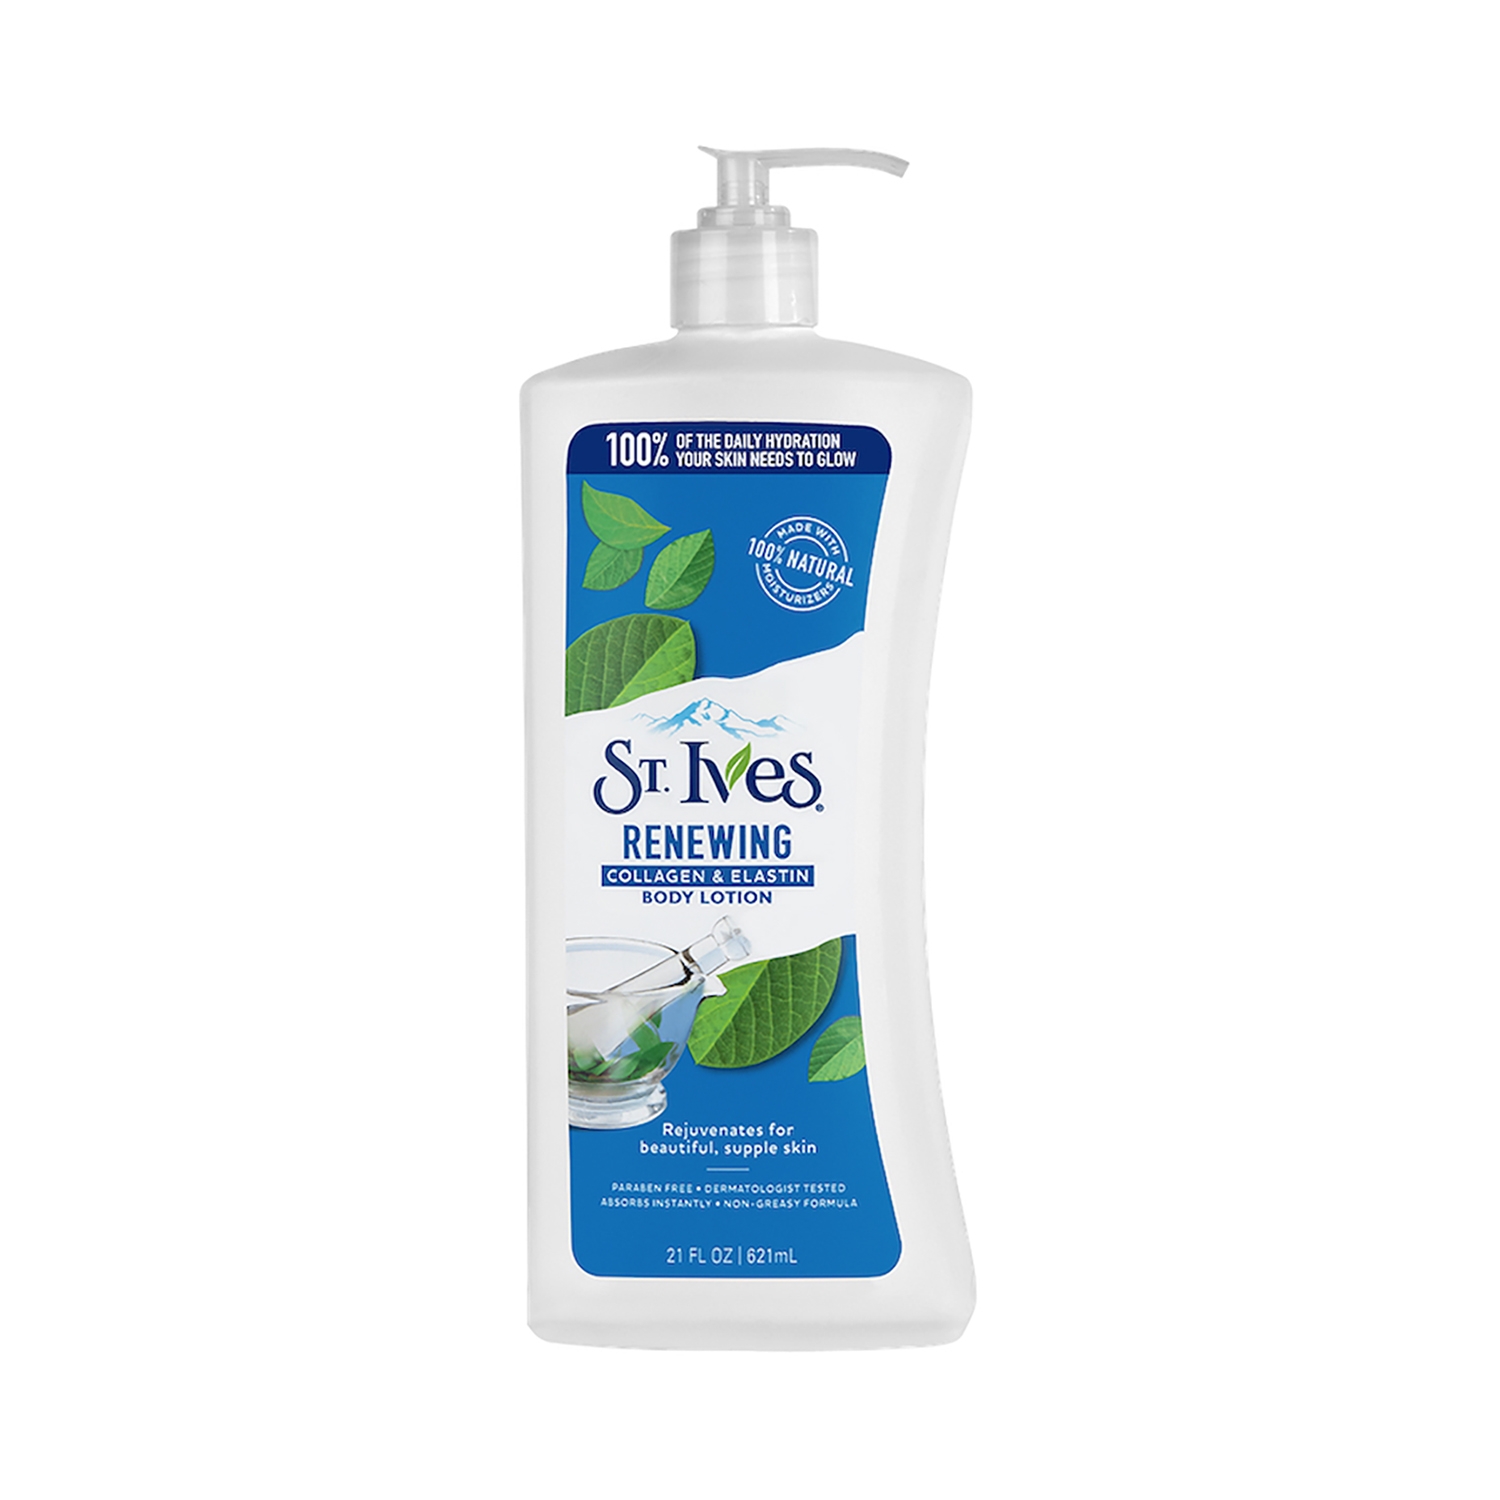 St. Ives | St. Ives Renewing Collagen & Elastin Body Lotion (621ml)